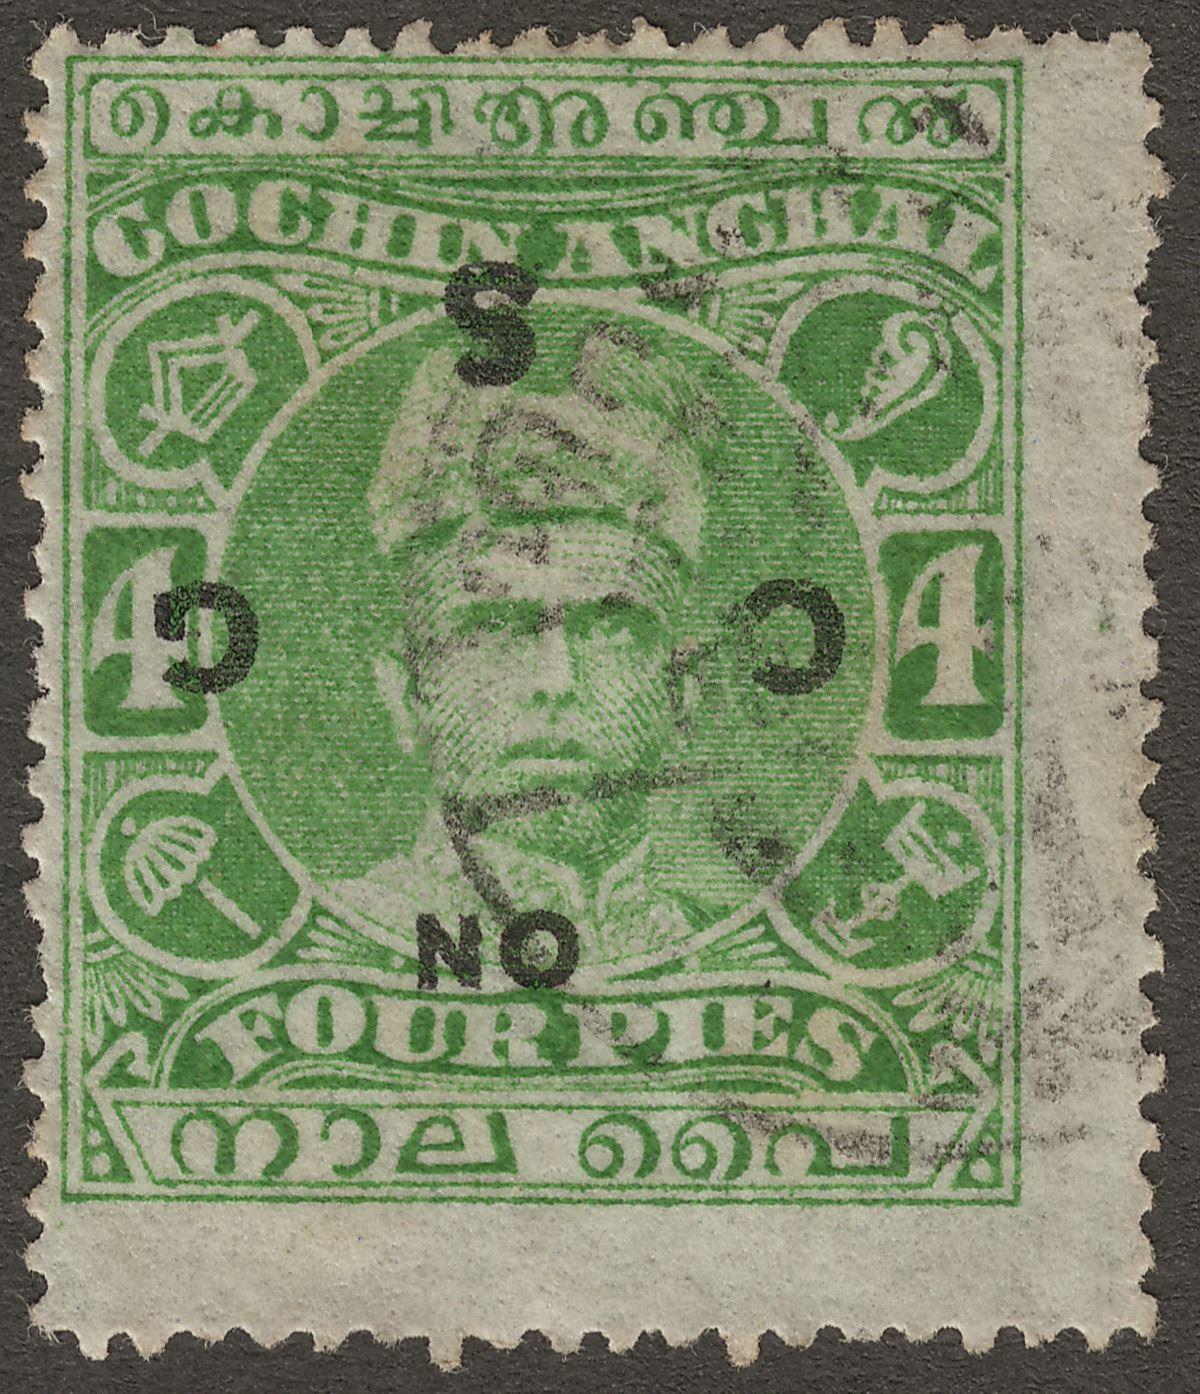 Indian States Cochin 1913 On CGS Inverted 4p Green Used SG O2a cat £350 sh perfs